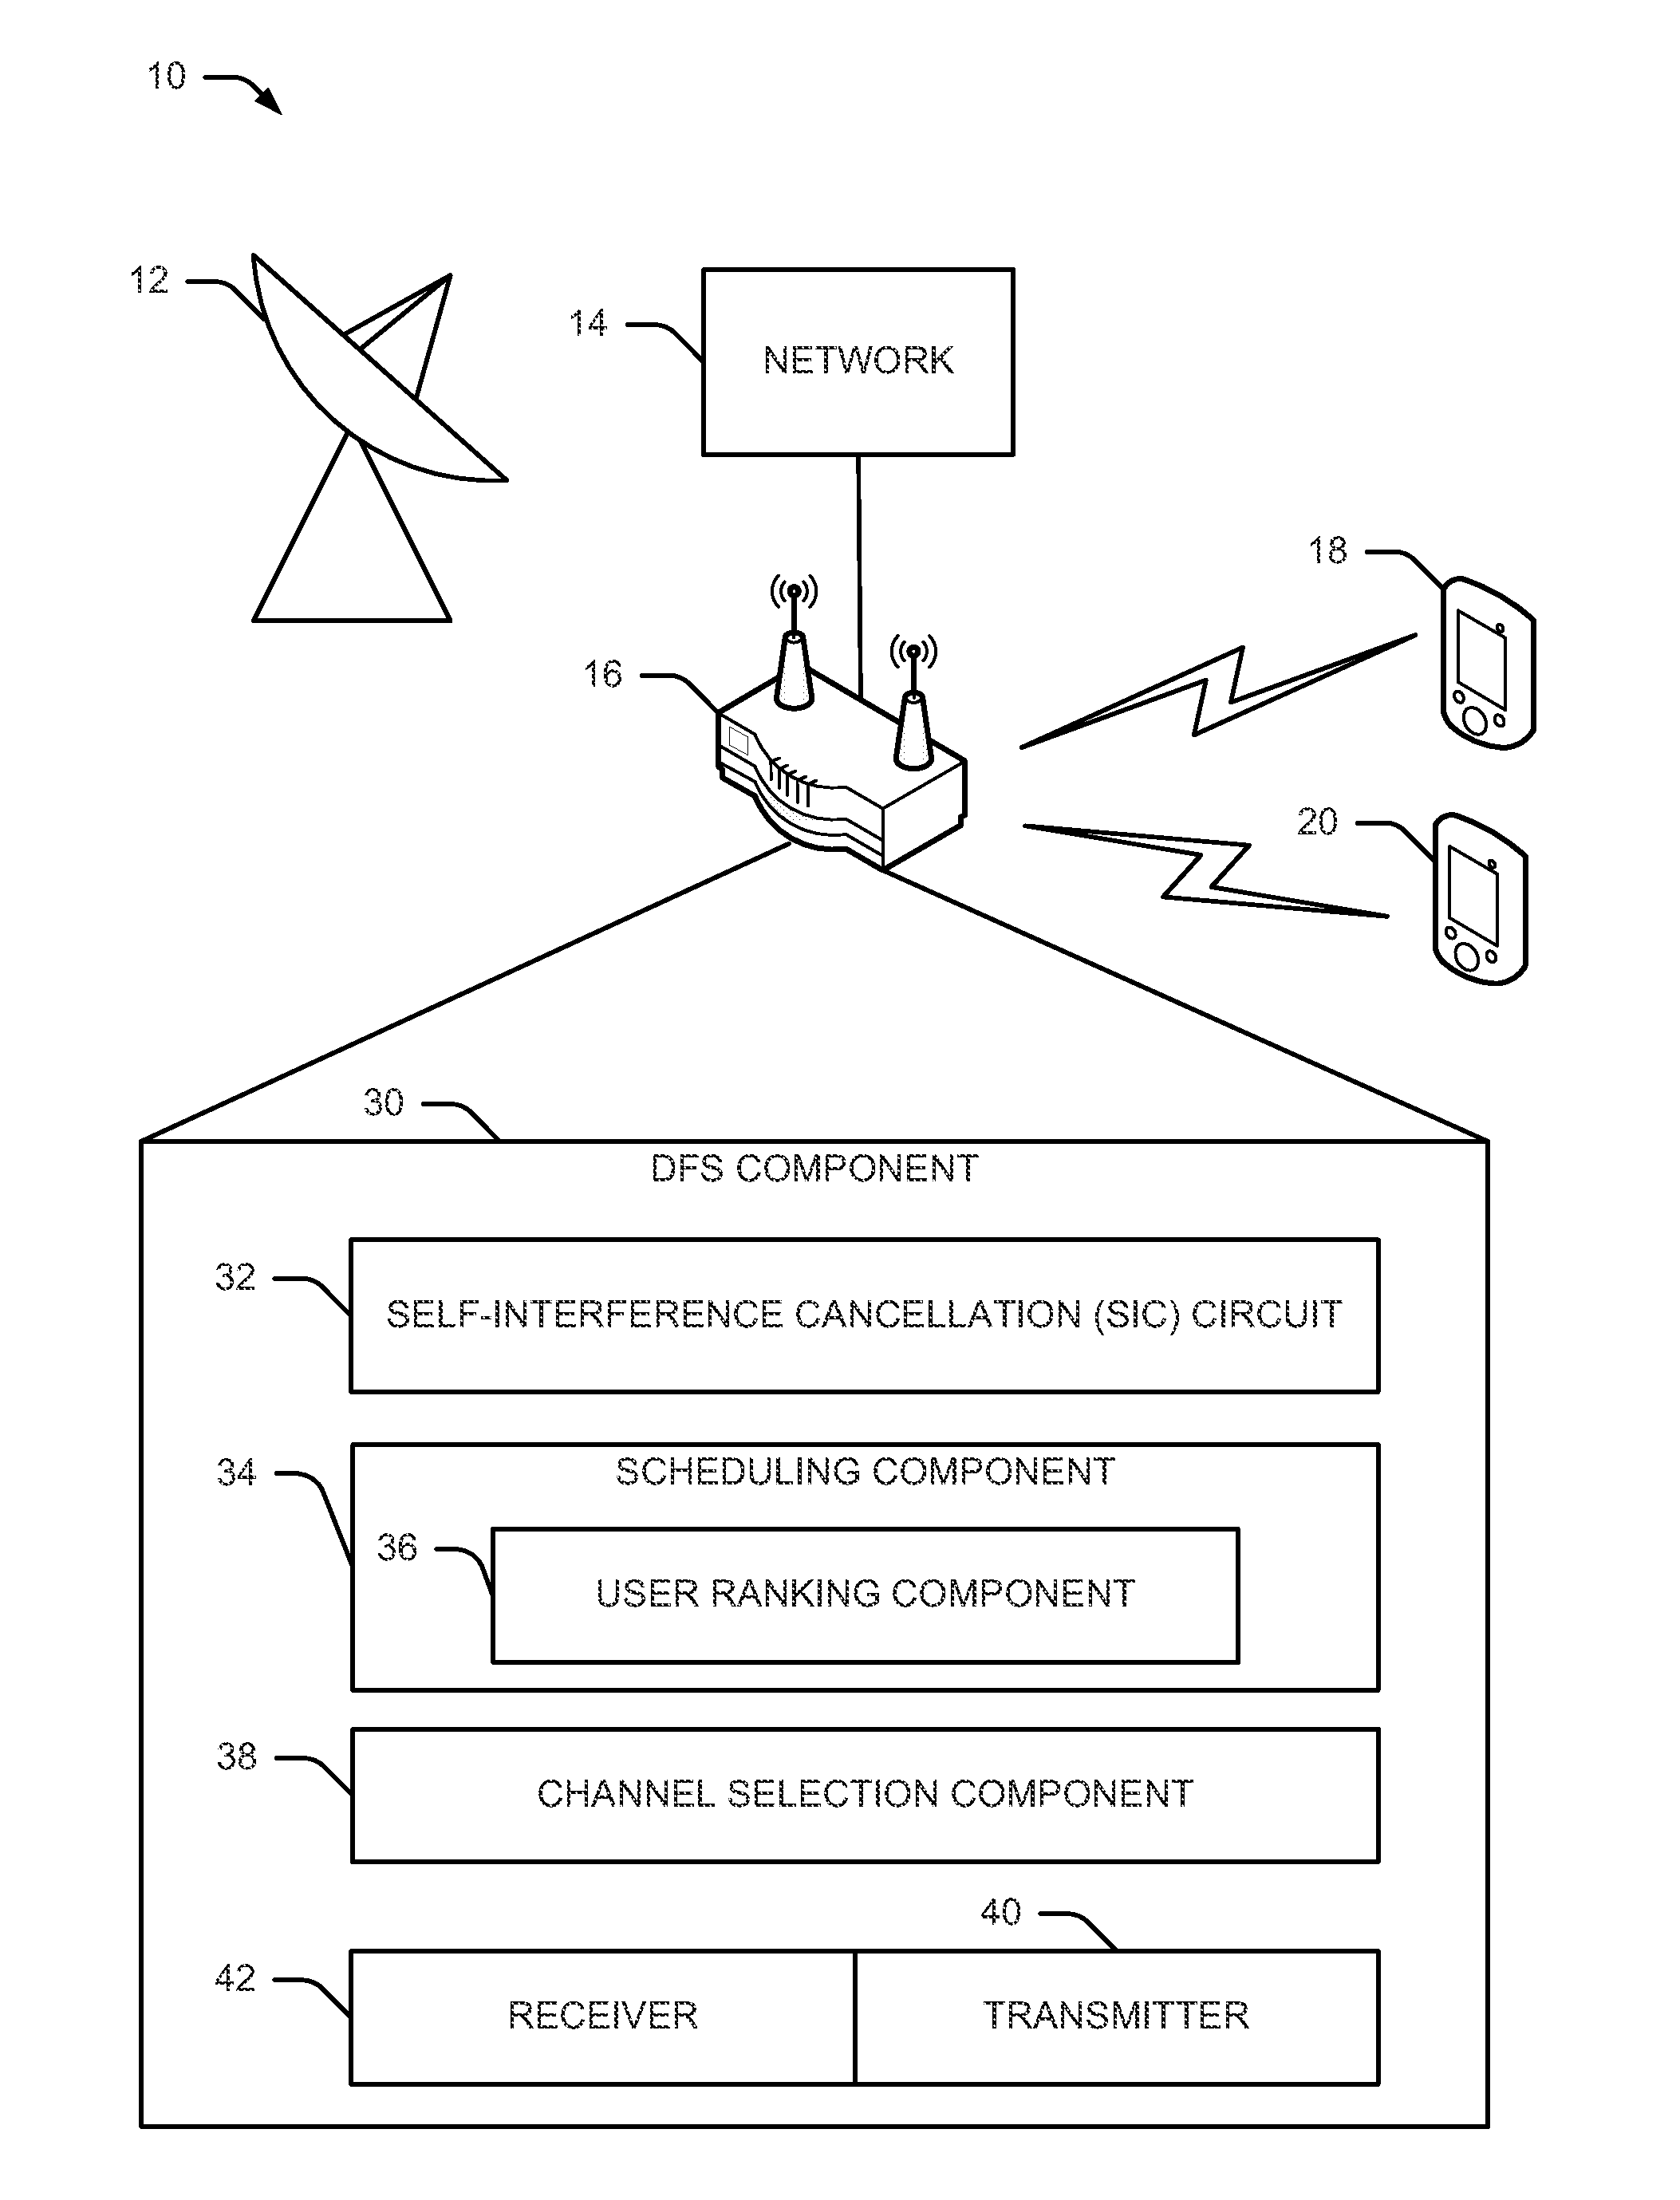 Methods and apparatus for adapting transmitter configuration for efficient concurrent transmission and radar detection through adaptive self-interference cancellation